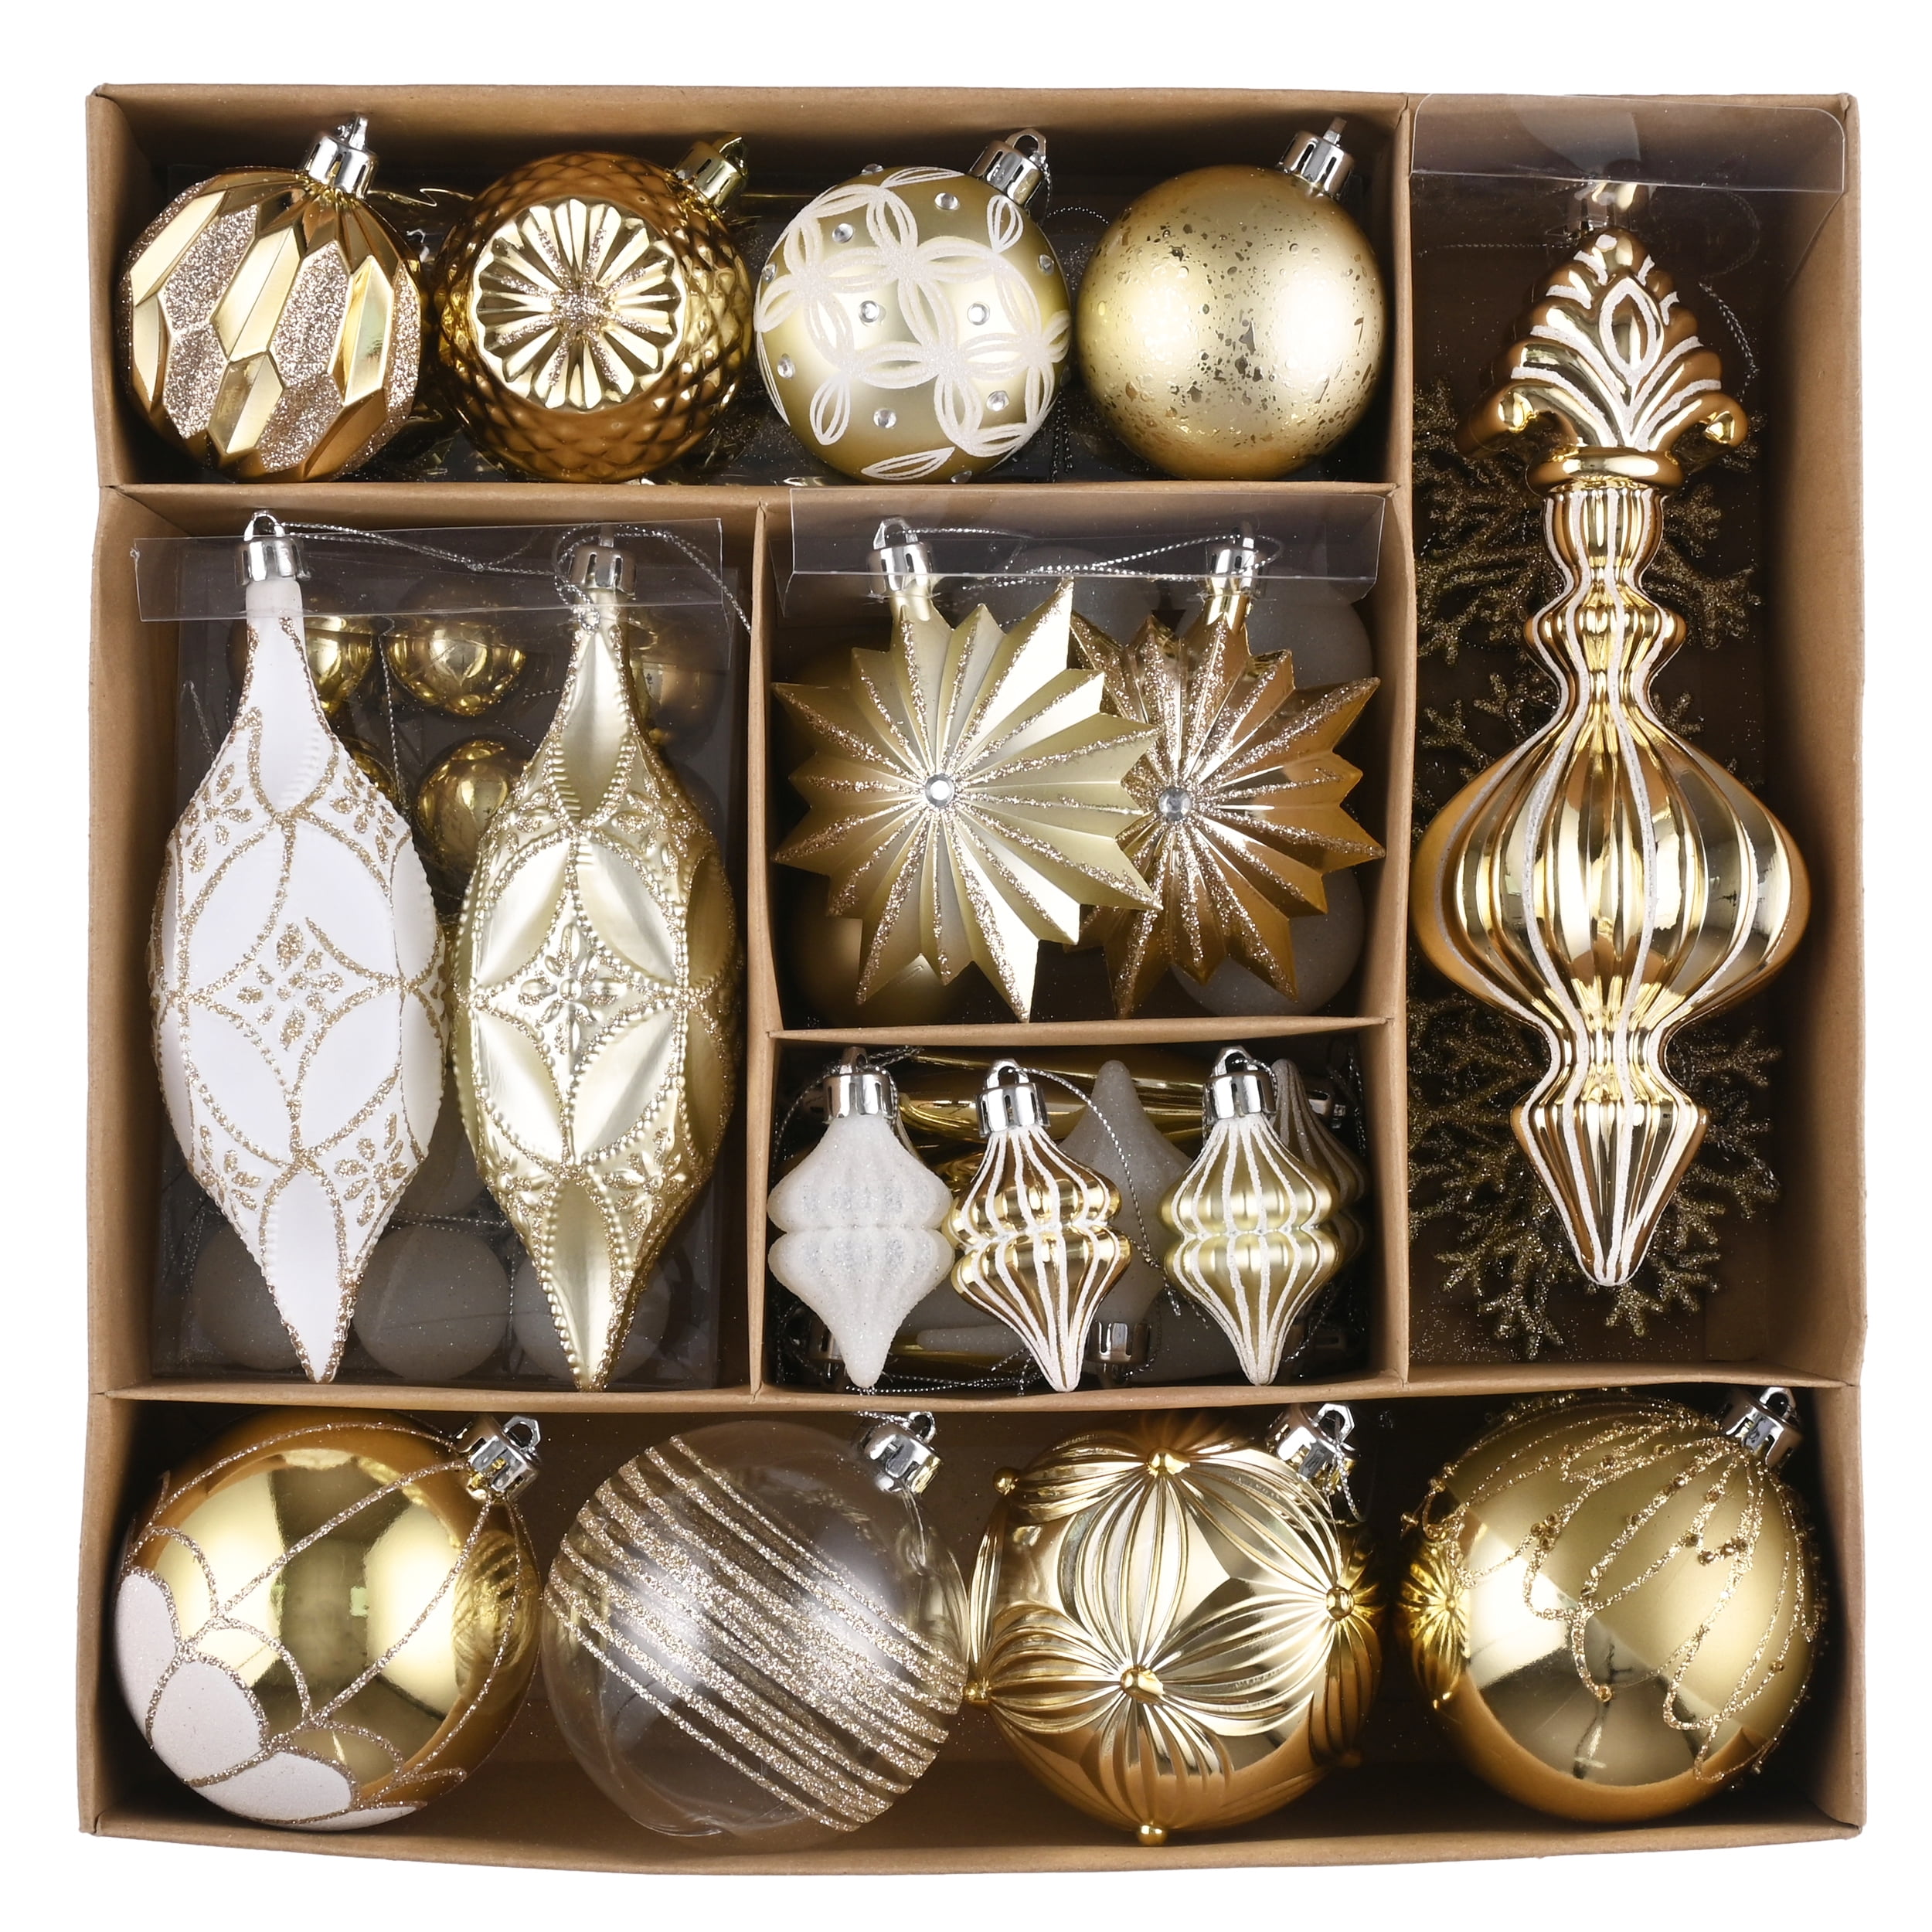 Valery Madelyn 80ct Elegant Gold and White Christmas Ball Ornaments, Shatterproof Assorted Christmas Tree Ornaments, Christmas Value Pack for Xmas Holiday Decoration